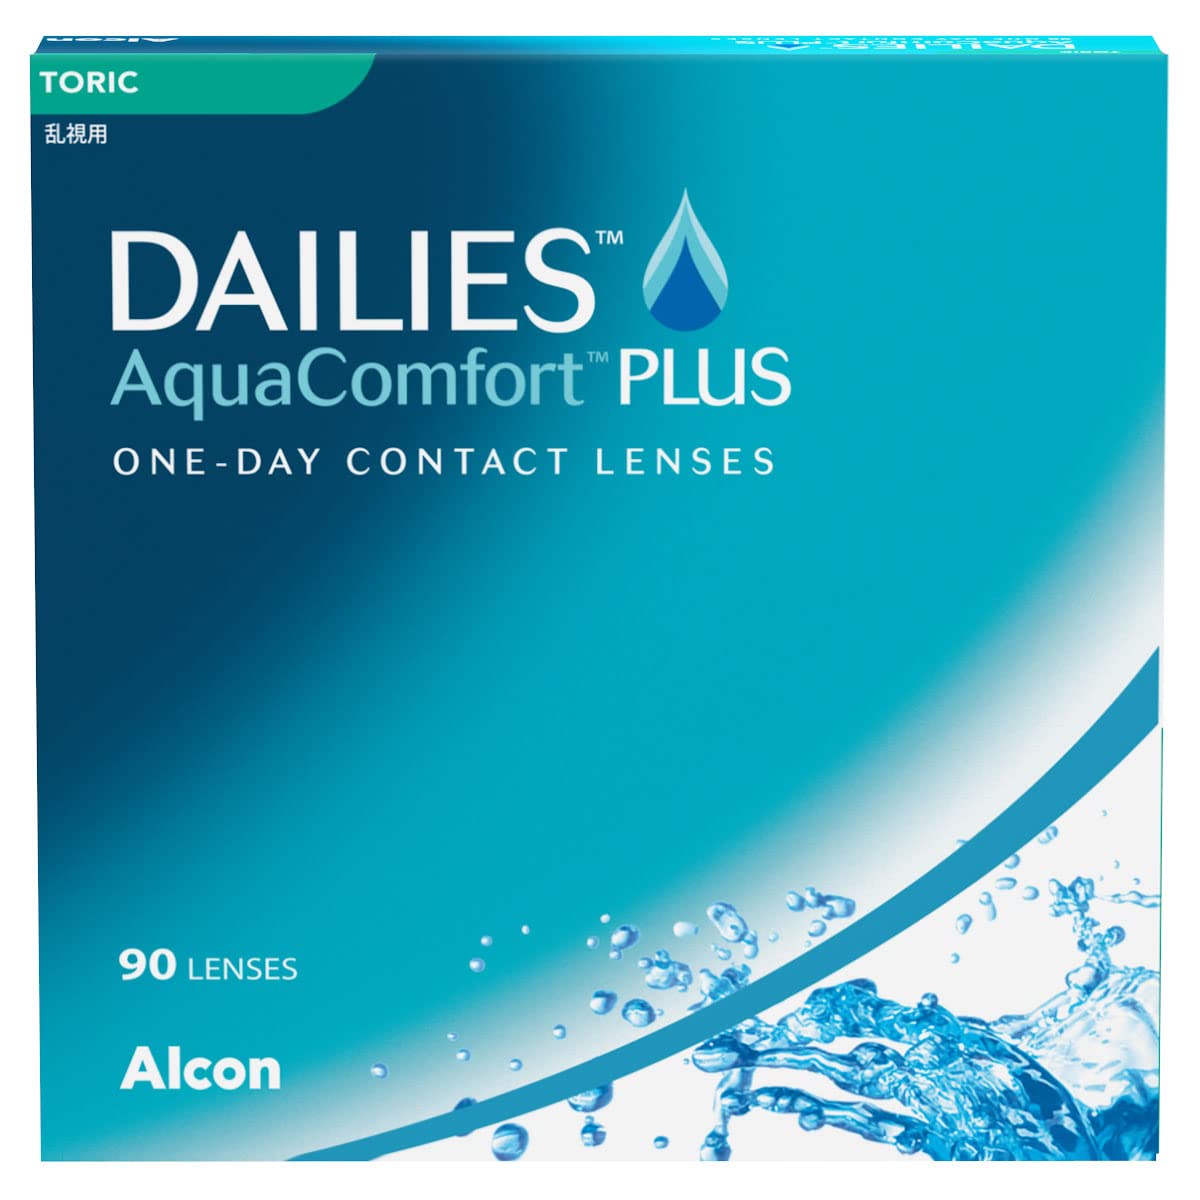 Dailies AquaComfort Plus Toric Tageslinsen weich, 90 Stück, BC 8.8 mm, DIA 14.4 mm, CYL -0.75, ACHSE 20, -1.75 Dioptrien